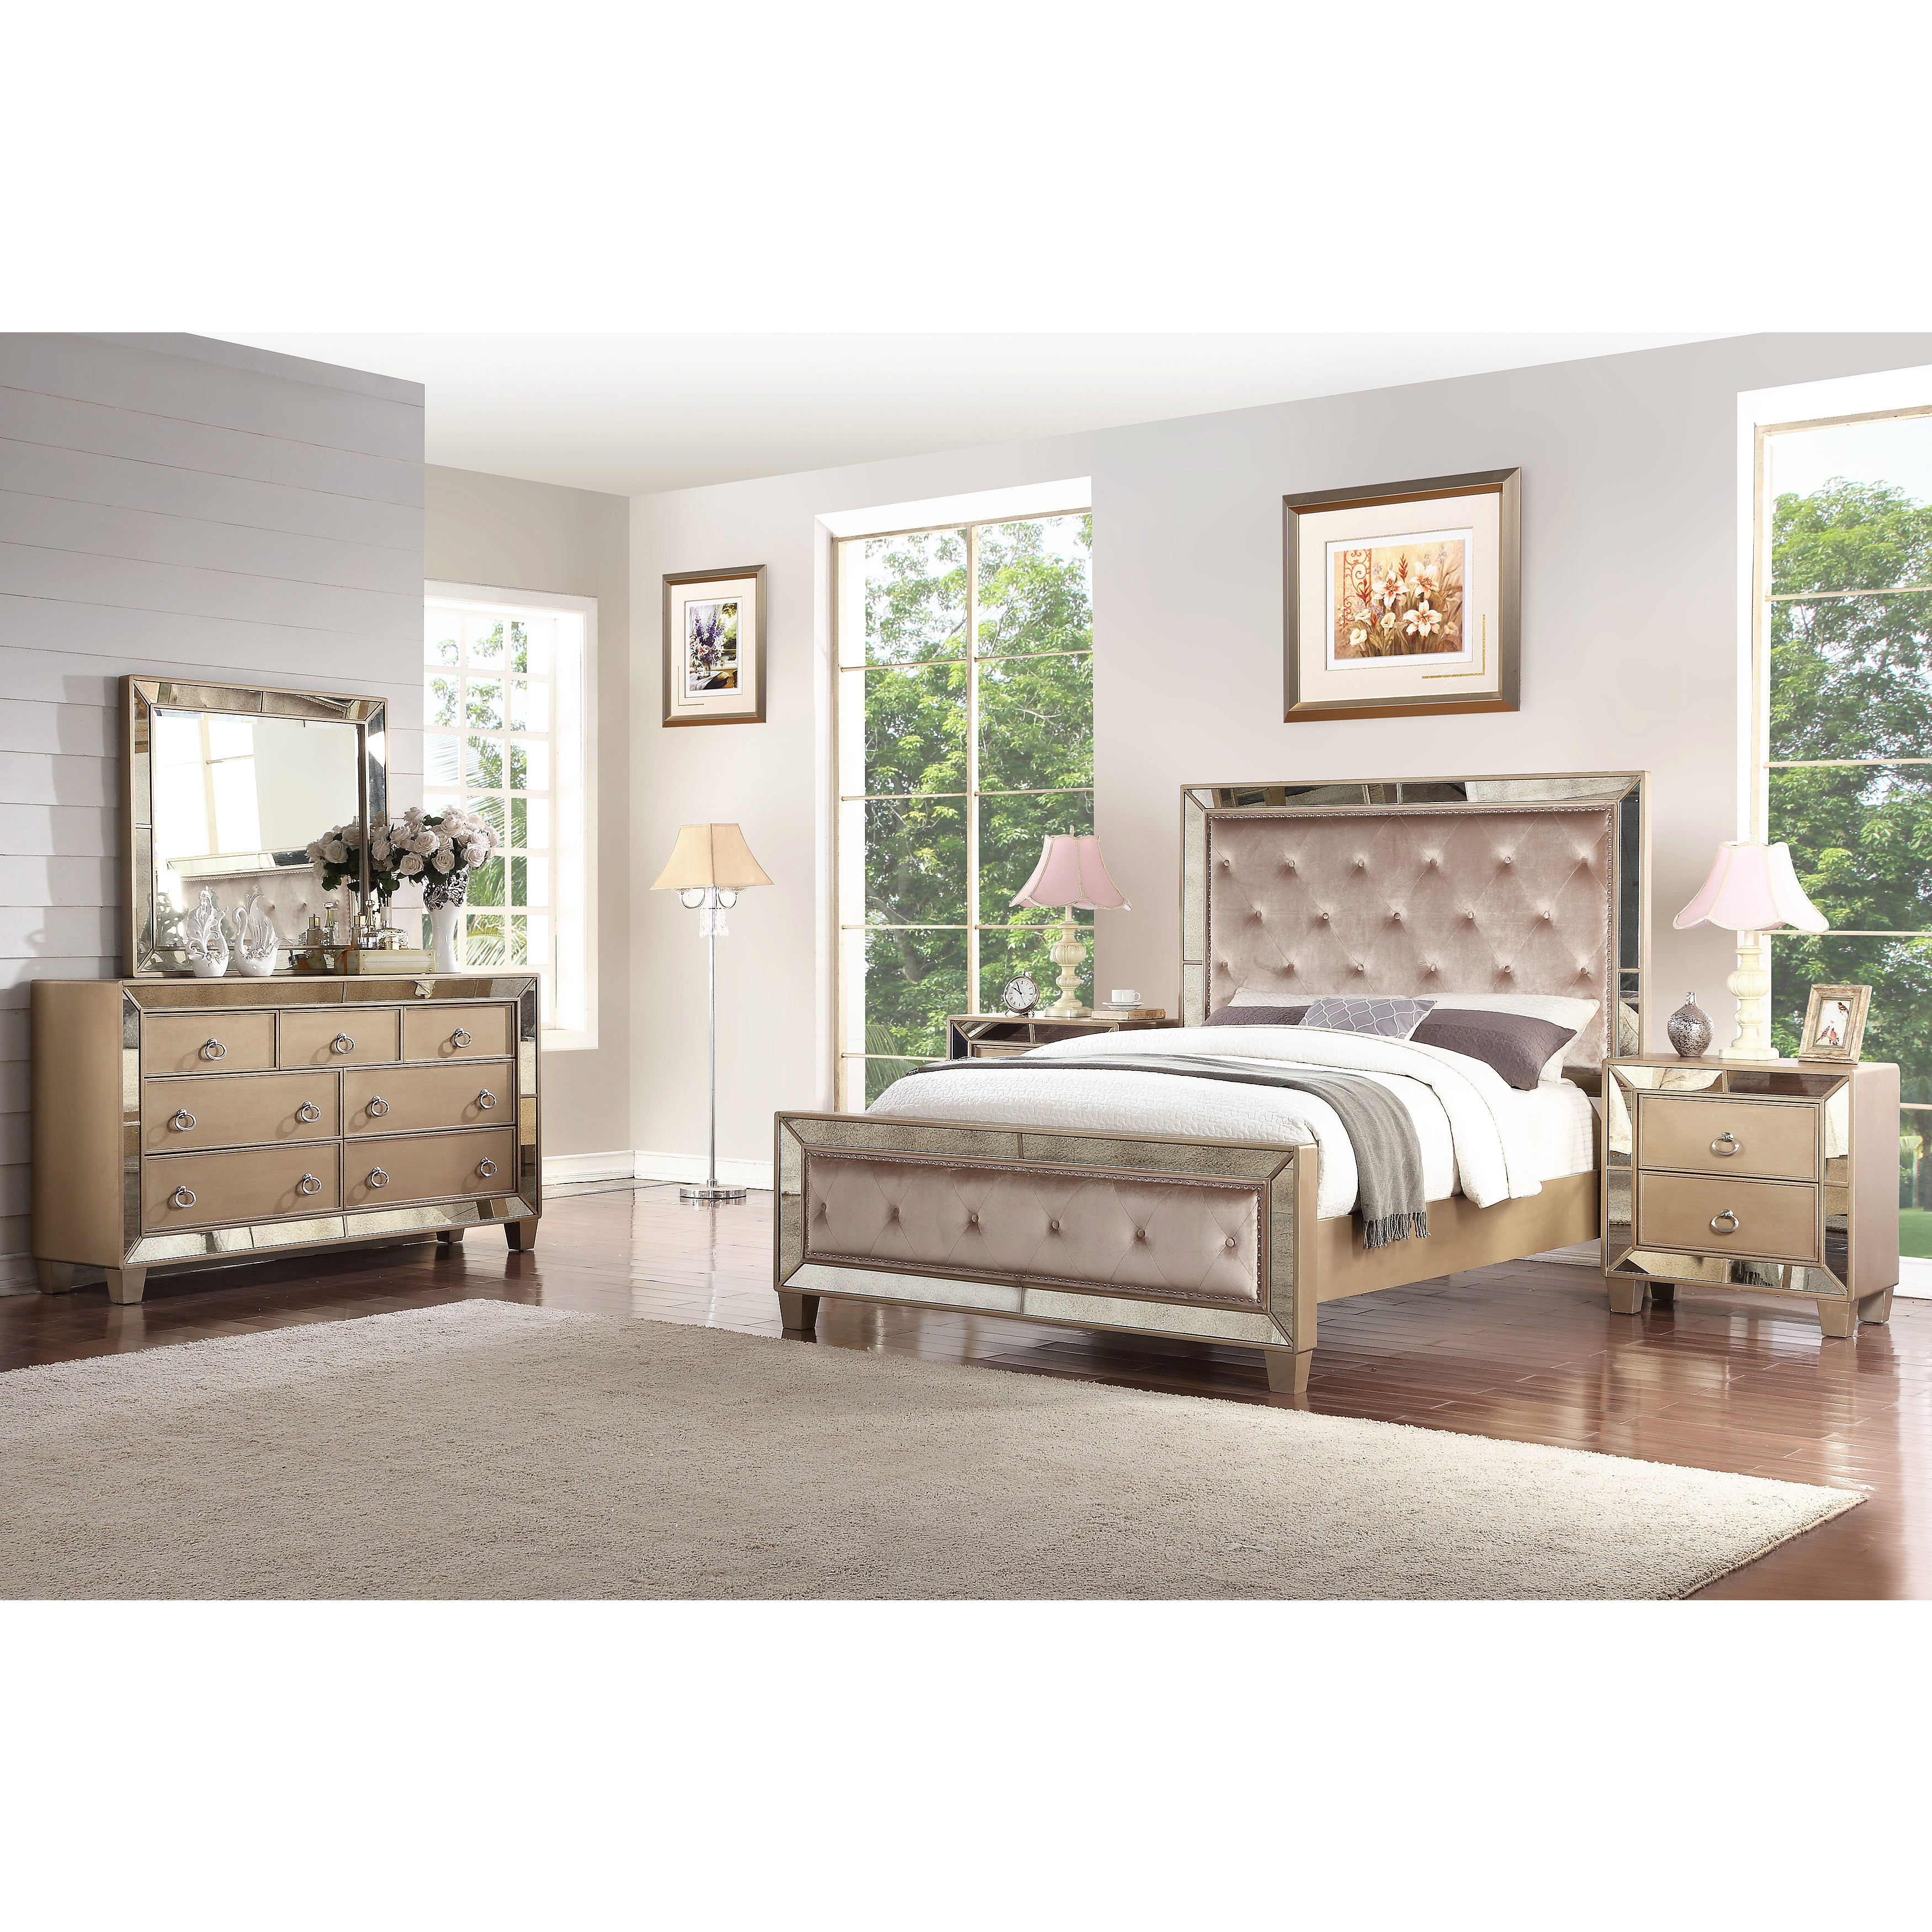 Abson Chateau Mirrored Tufted 5 Piece Bedroom Set for size 3500 X 3500